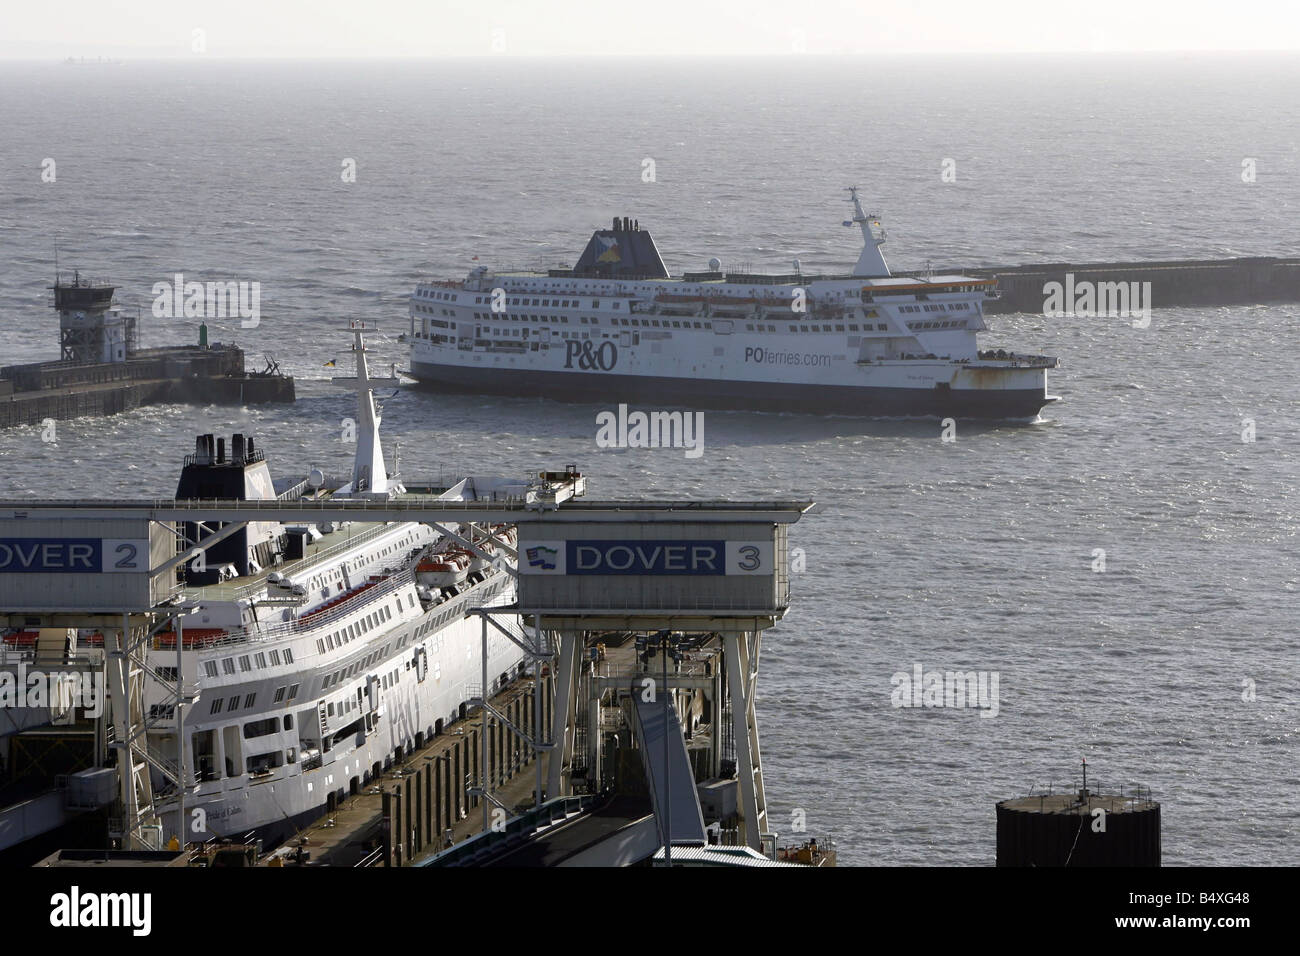 Ferries queue at the enterance to Dover harbour on the day when Bulgaria and Romania join the European Union 01 01 07 meaning that immigration laws regarding these countries are relaxed Stock Photo